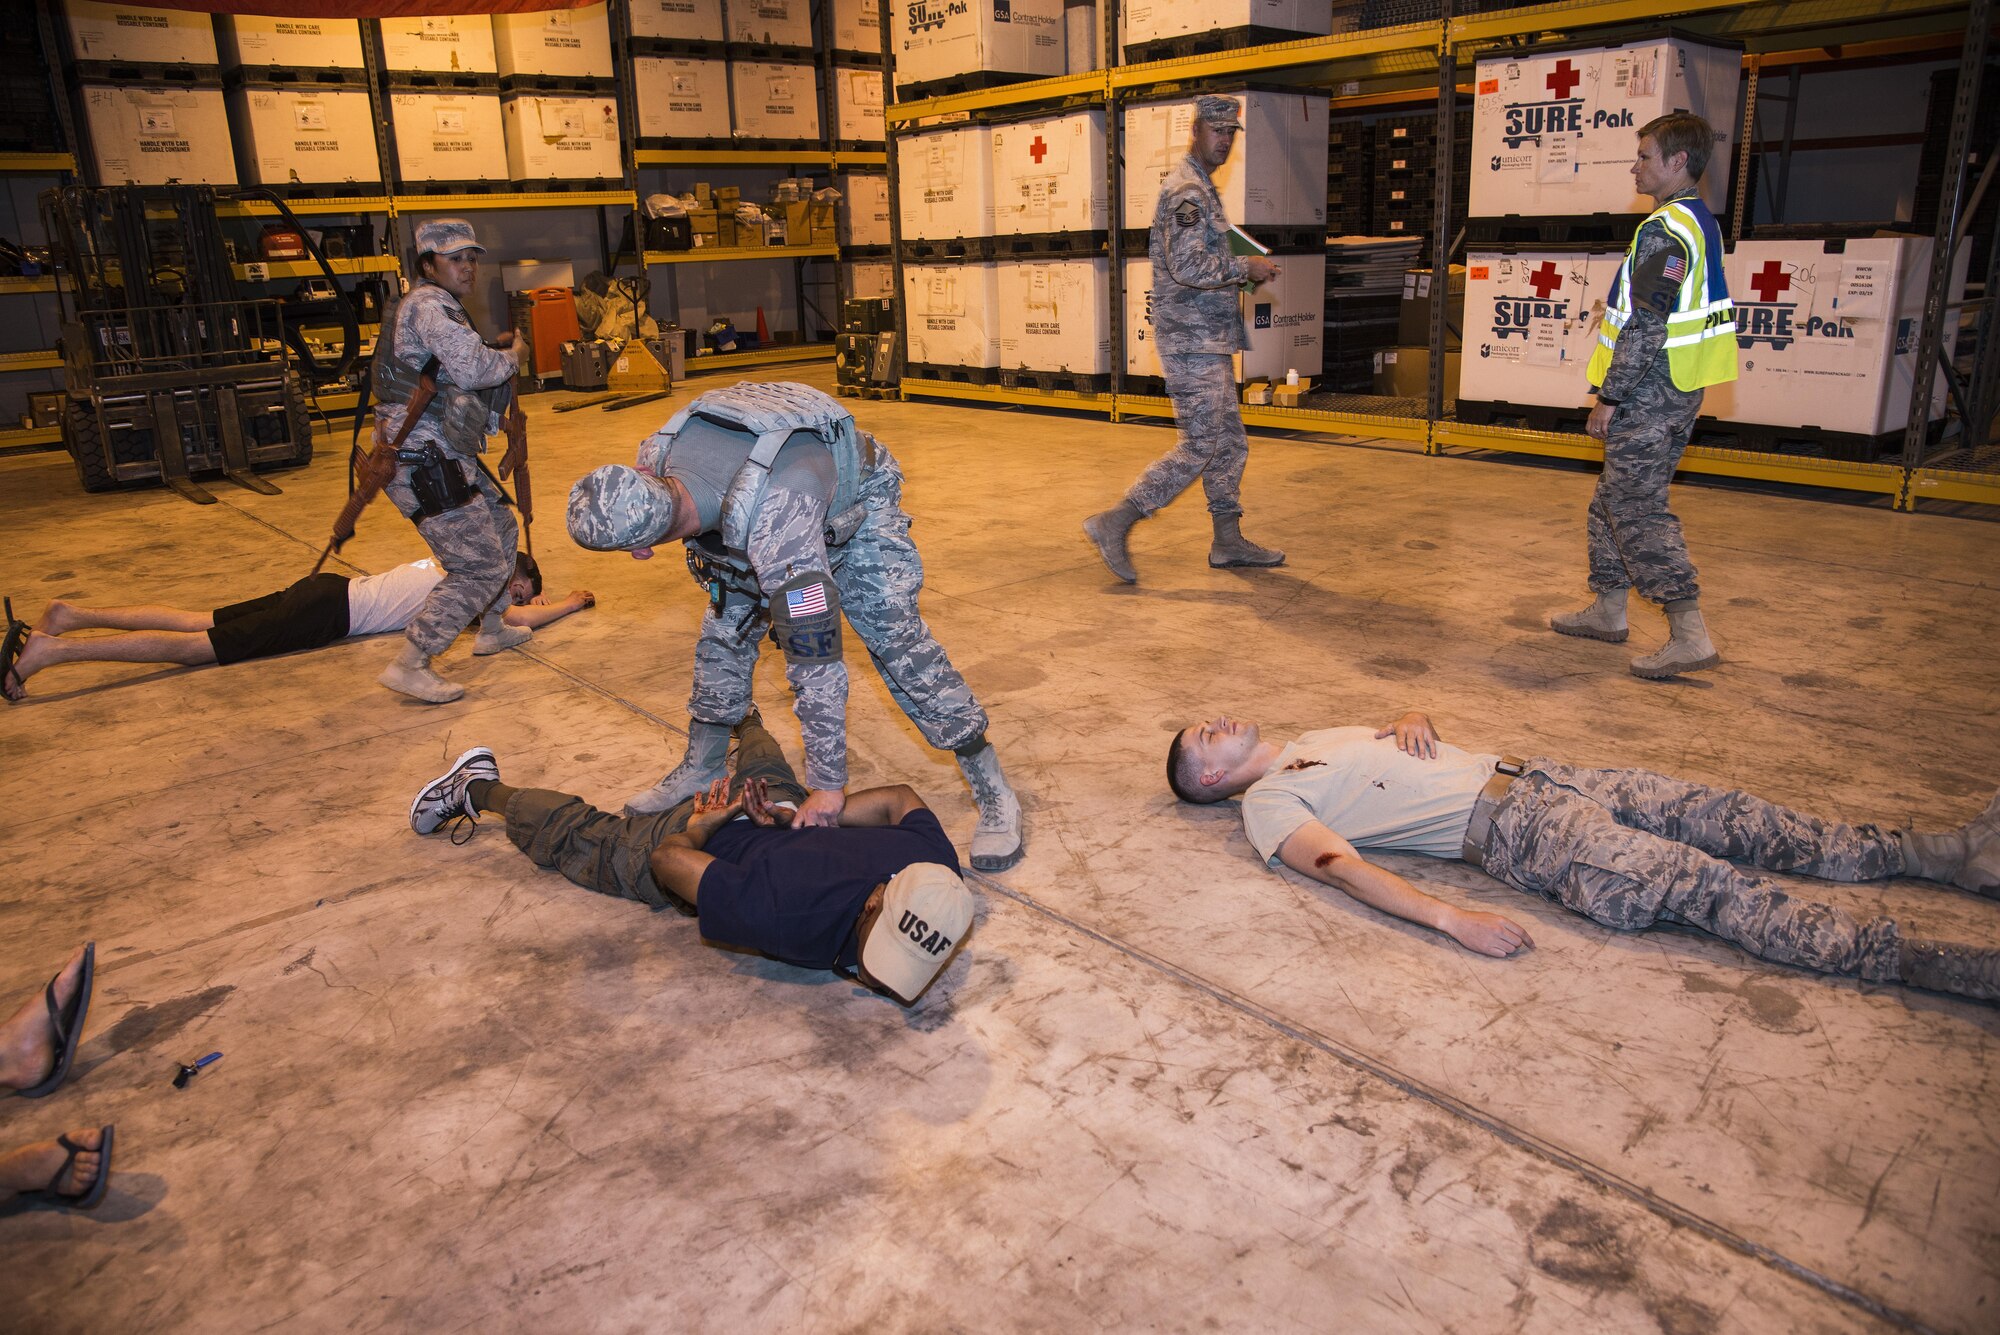 Members of the 379th Expeditionary Security Forces Squadron are evaluated while working to clear a medical warehouse facility during an active shooter scenario June 19, 2015, at Al Udeid Air Base, Qatar. Several agencies on base were tested on their reactions to the scenario to make sure proper protocols were followed in case an on-base incident truly ever occurred.  (U.S. Air Force photo by Tech. Sgt. Rasheen Douglas)